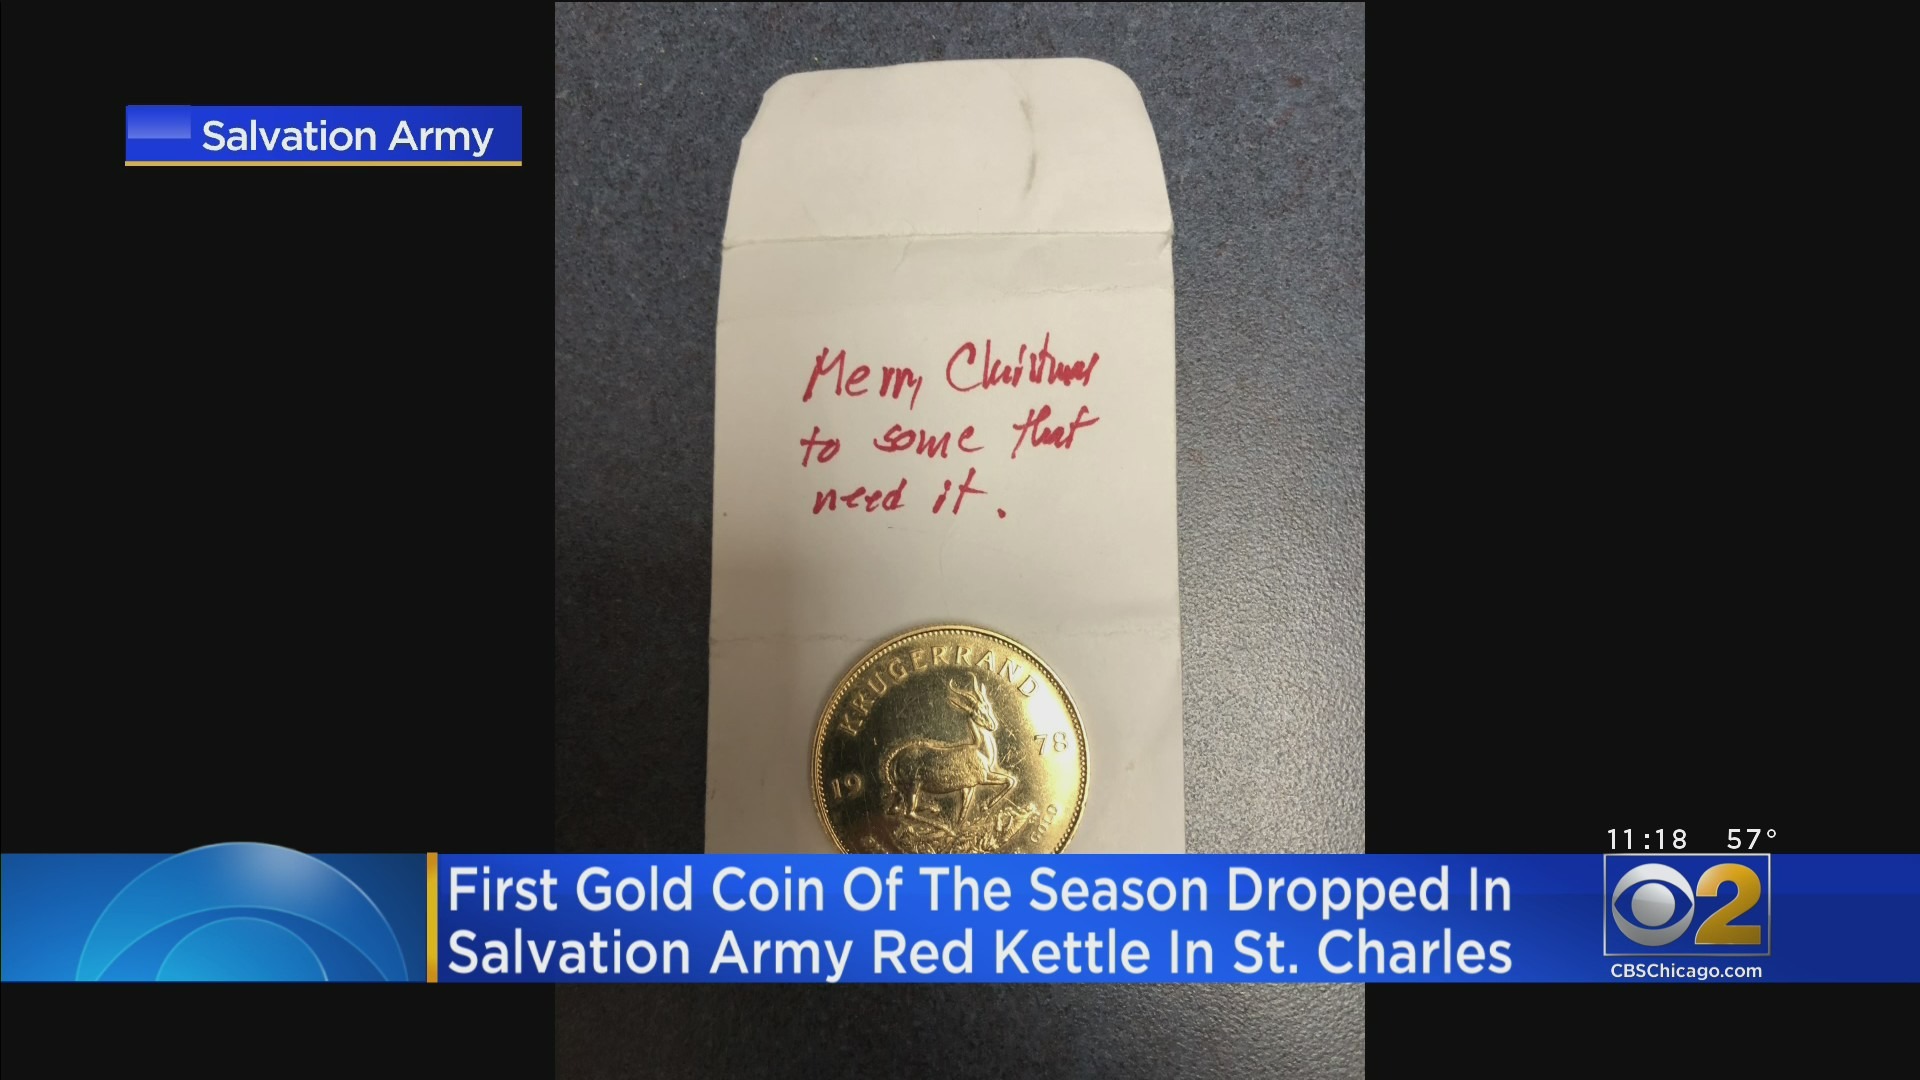 Gold Coin Worth $1,800 Dropped Into The Salvation Army Red Kettle In St. Charles